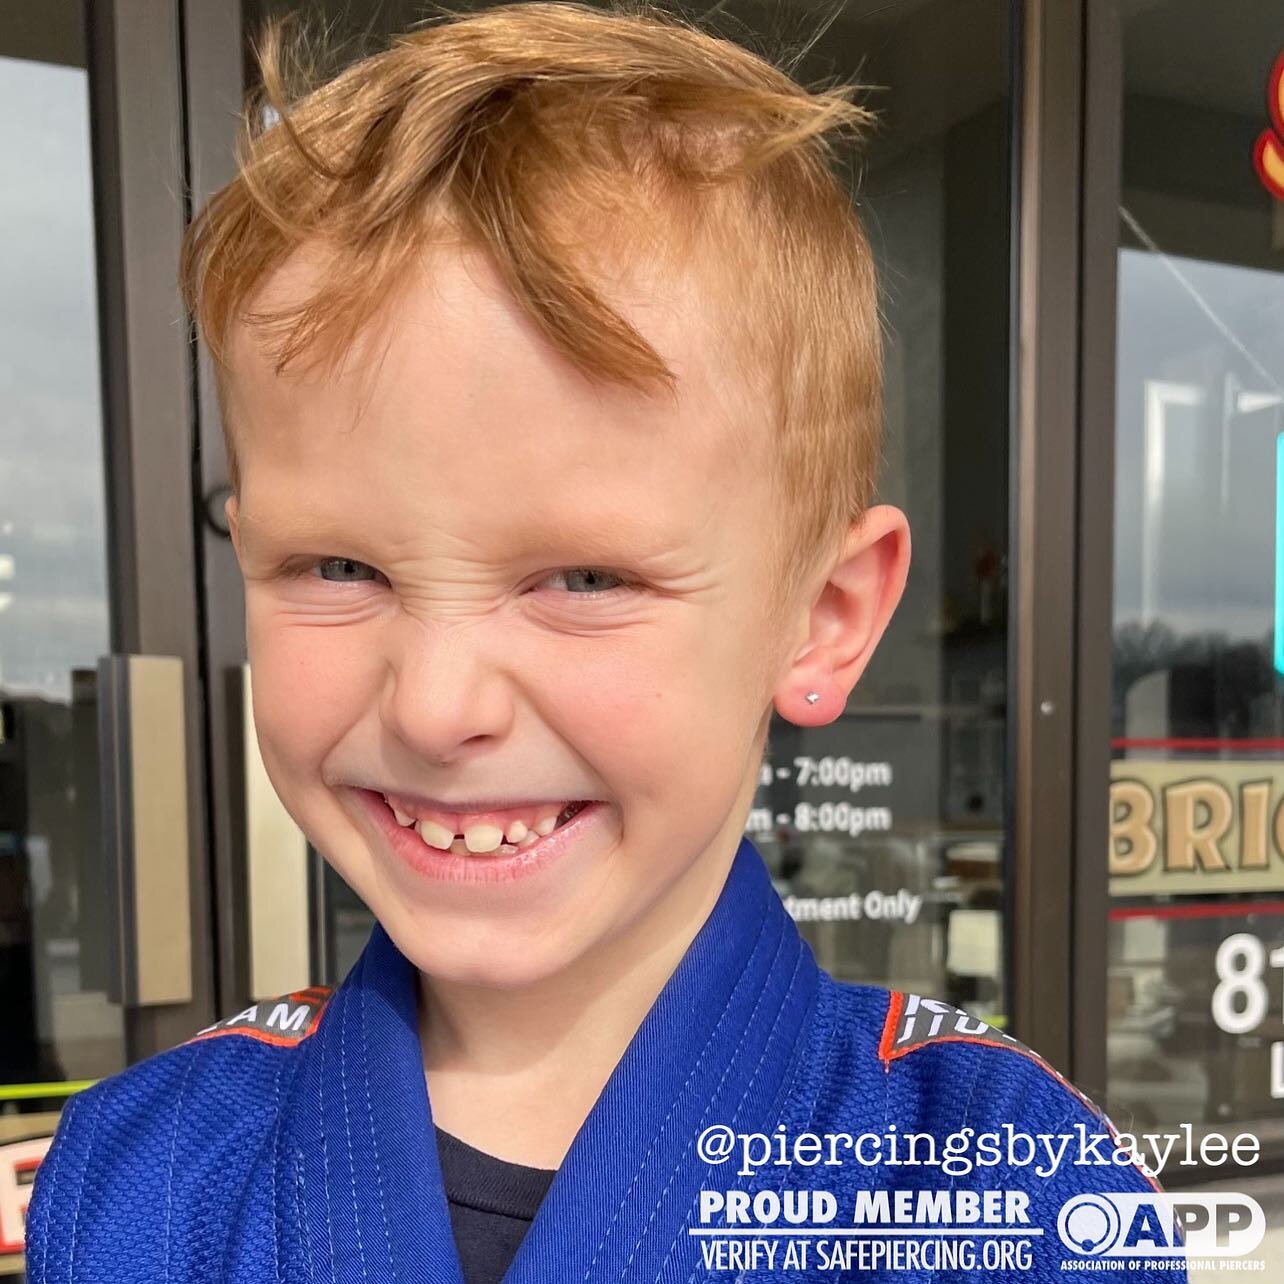 If you didn&rsquo;t already know, we offer earlobe piercings, ages 7+ at our studio by appointment. This brave kiddo did a great job getting his first set of earlobe piercings with us! He chose some super rad titanium X&rsquo;s that for him, worked a